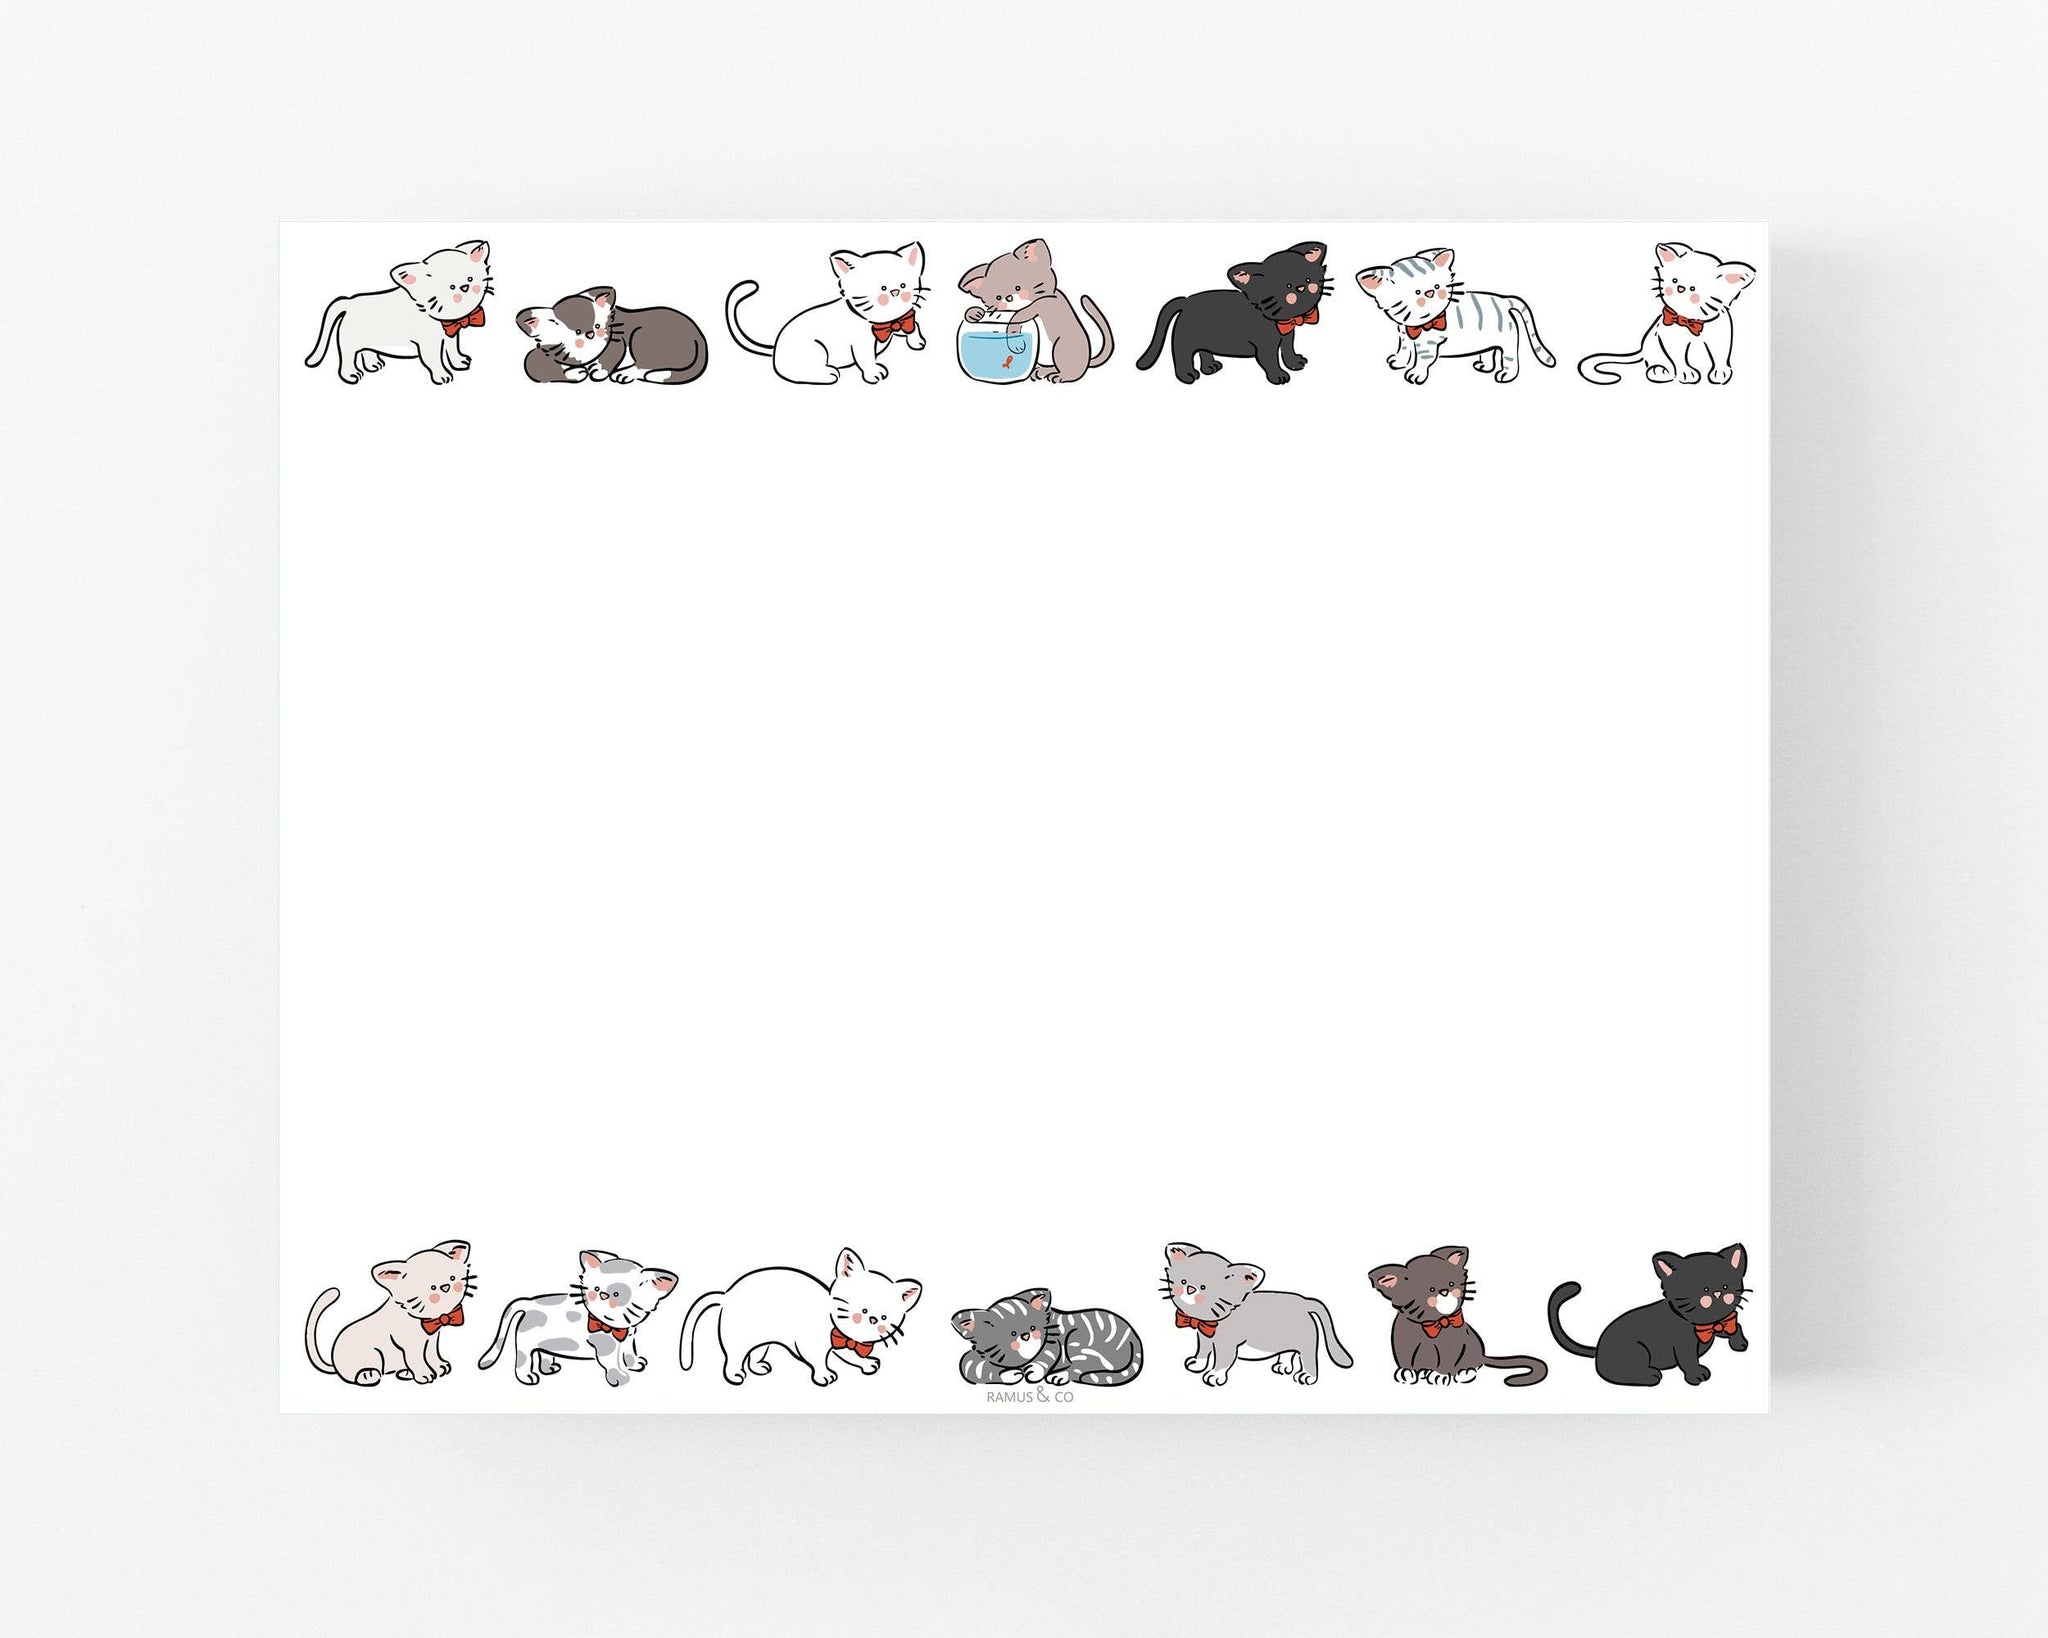 30% OFF Planner Stickers - The Imagination Spot